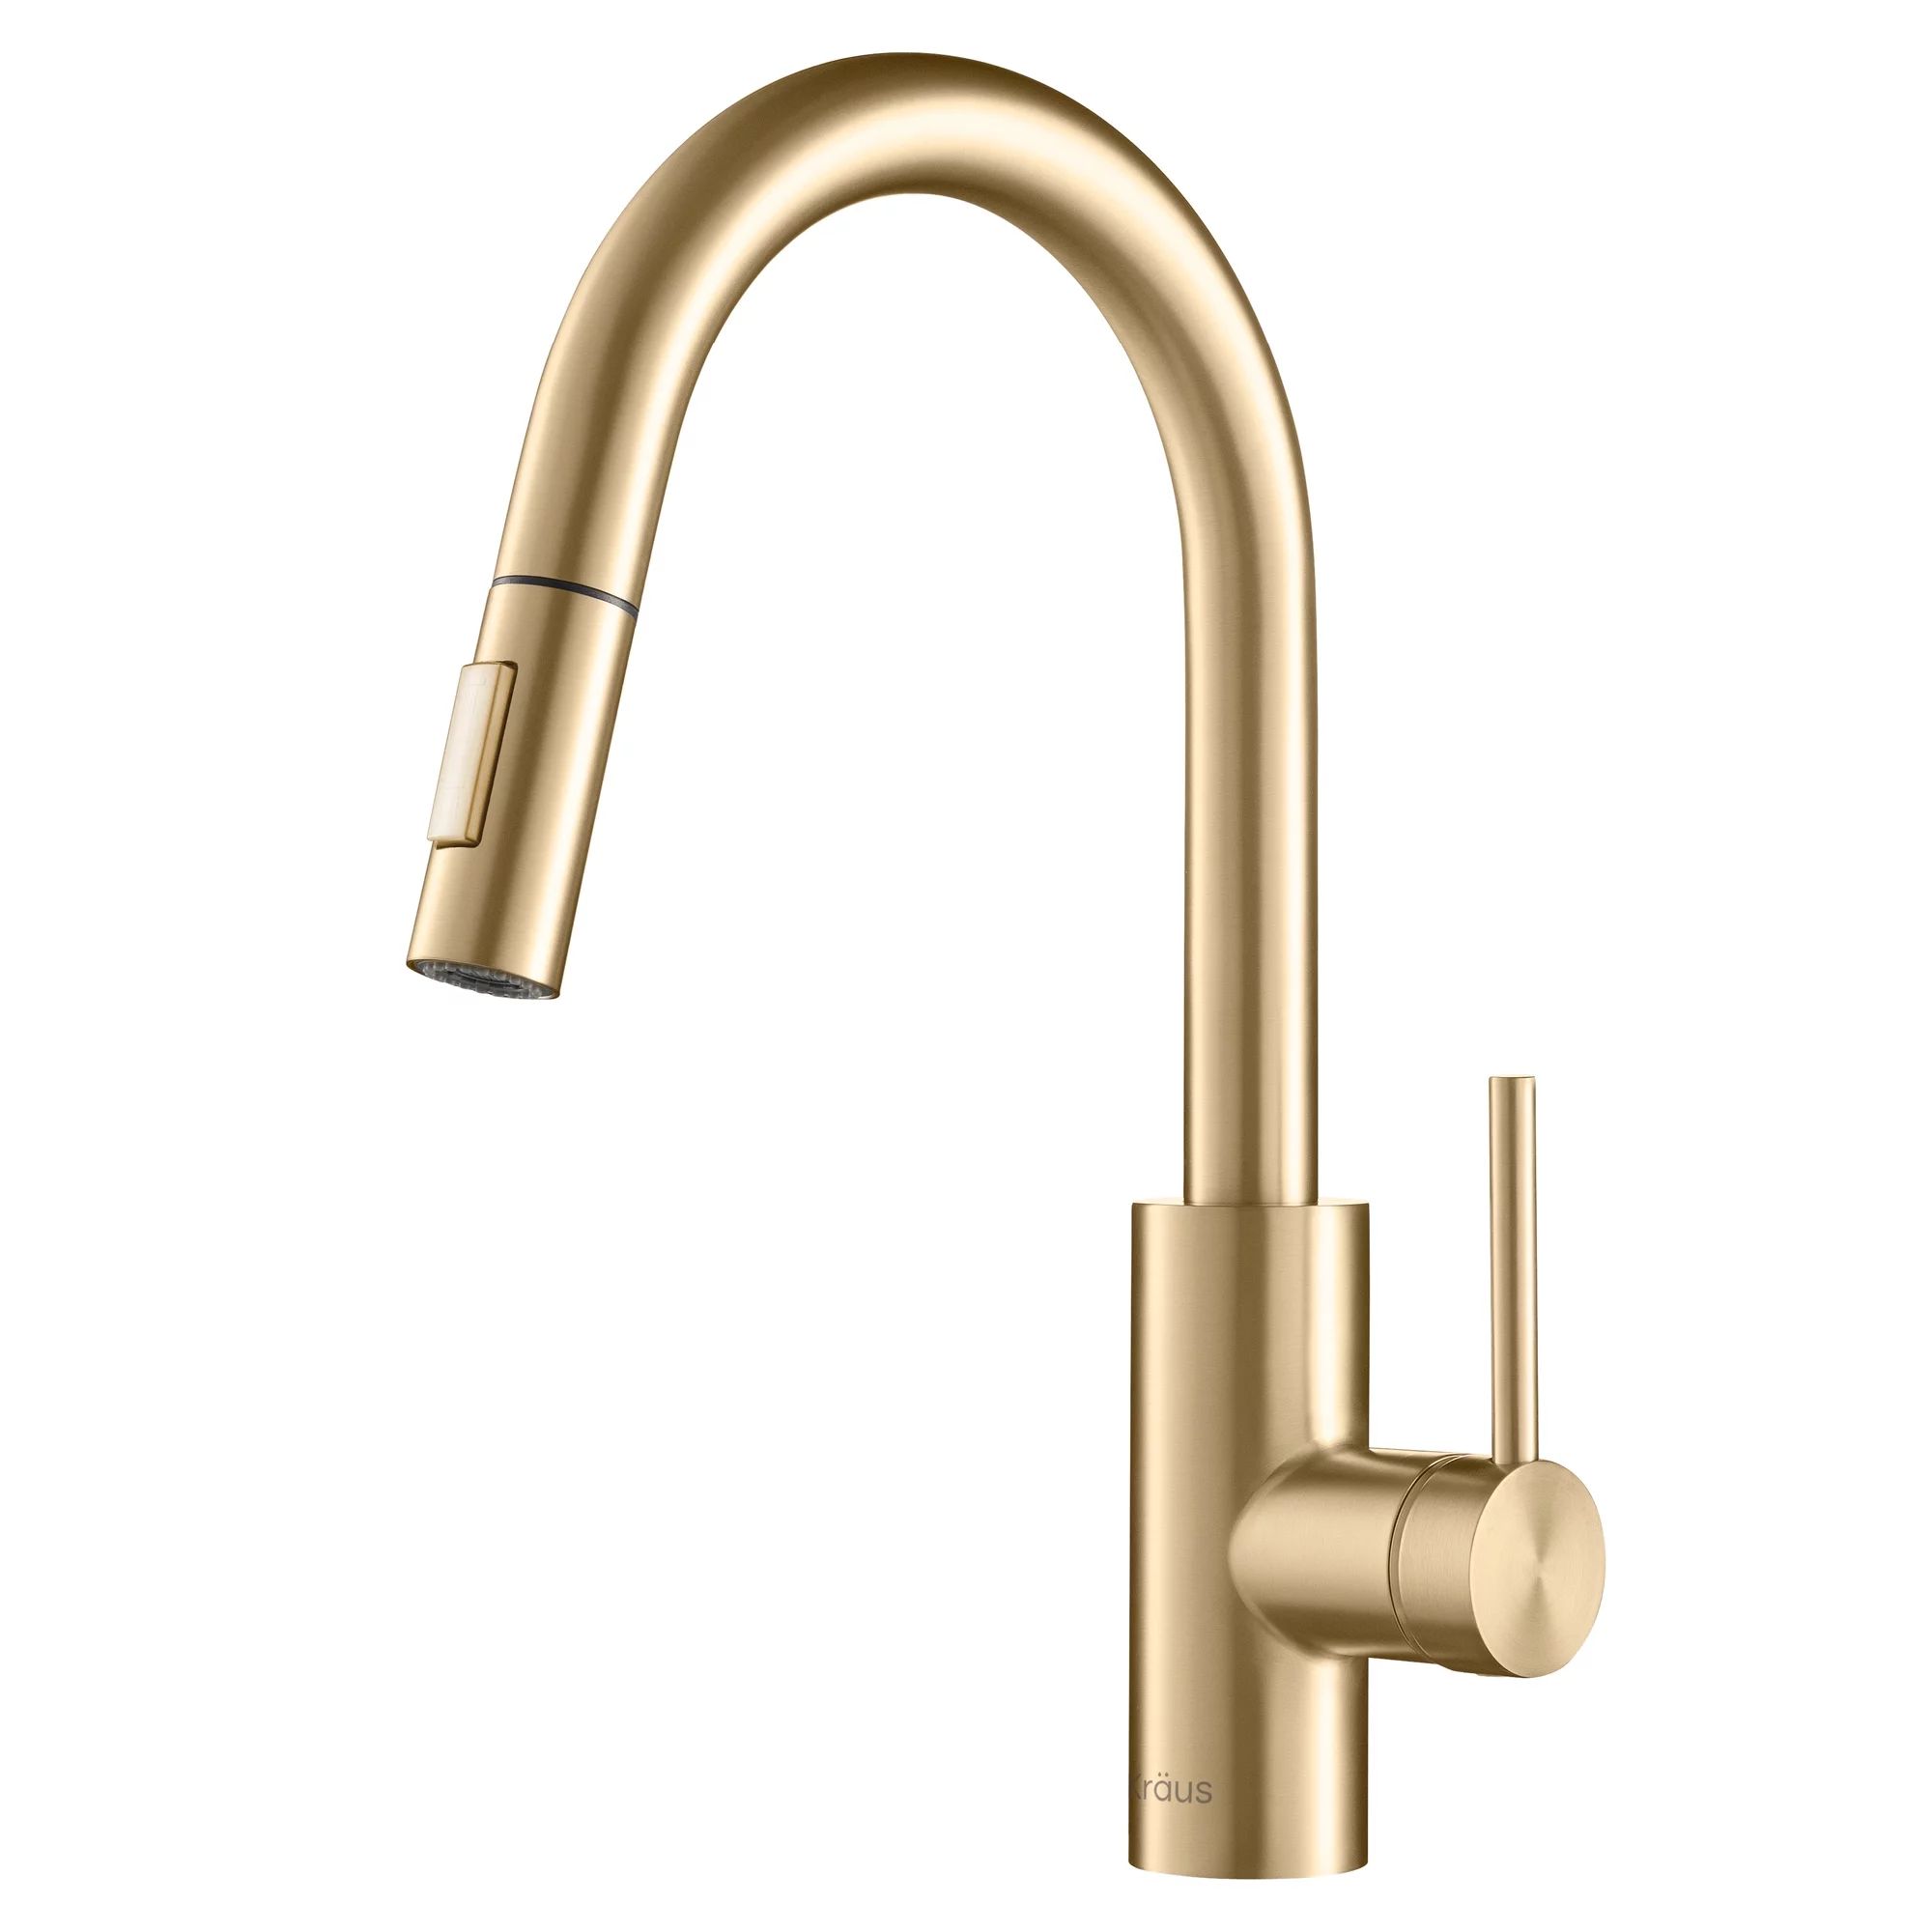 KRAUS Oletto Single Handle Pull Down Kitchen Faucet in Brushed Brass Finish | Walmart (US)